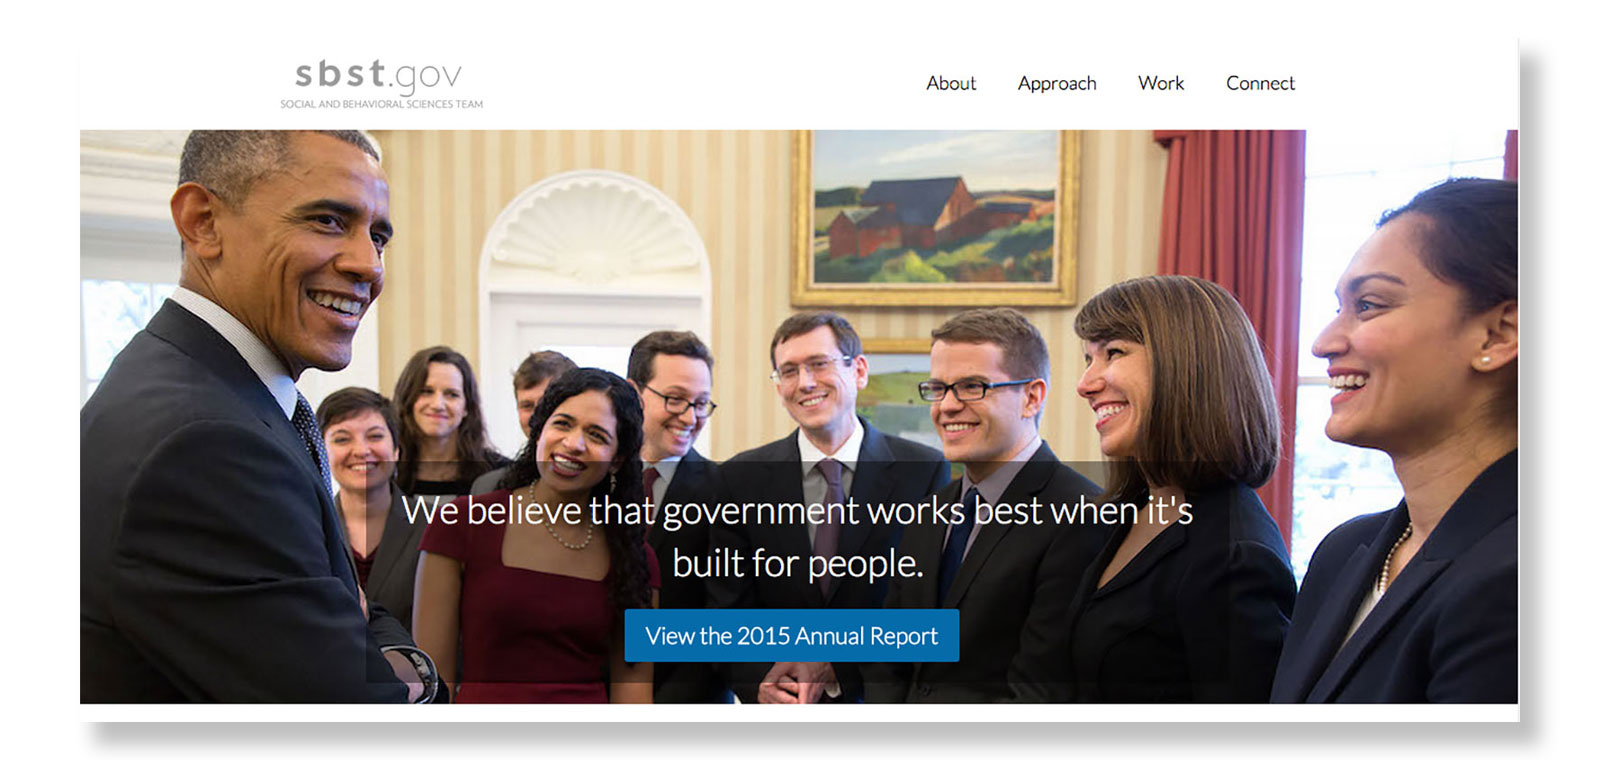 The new White House Social and Behavioral Sciences Team homepage